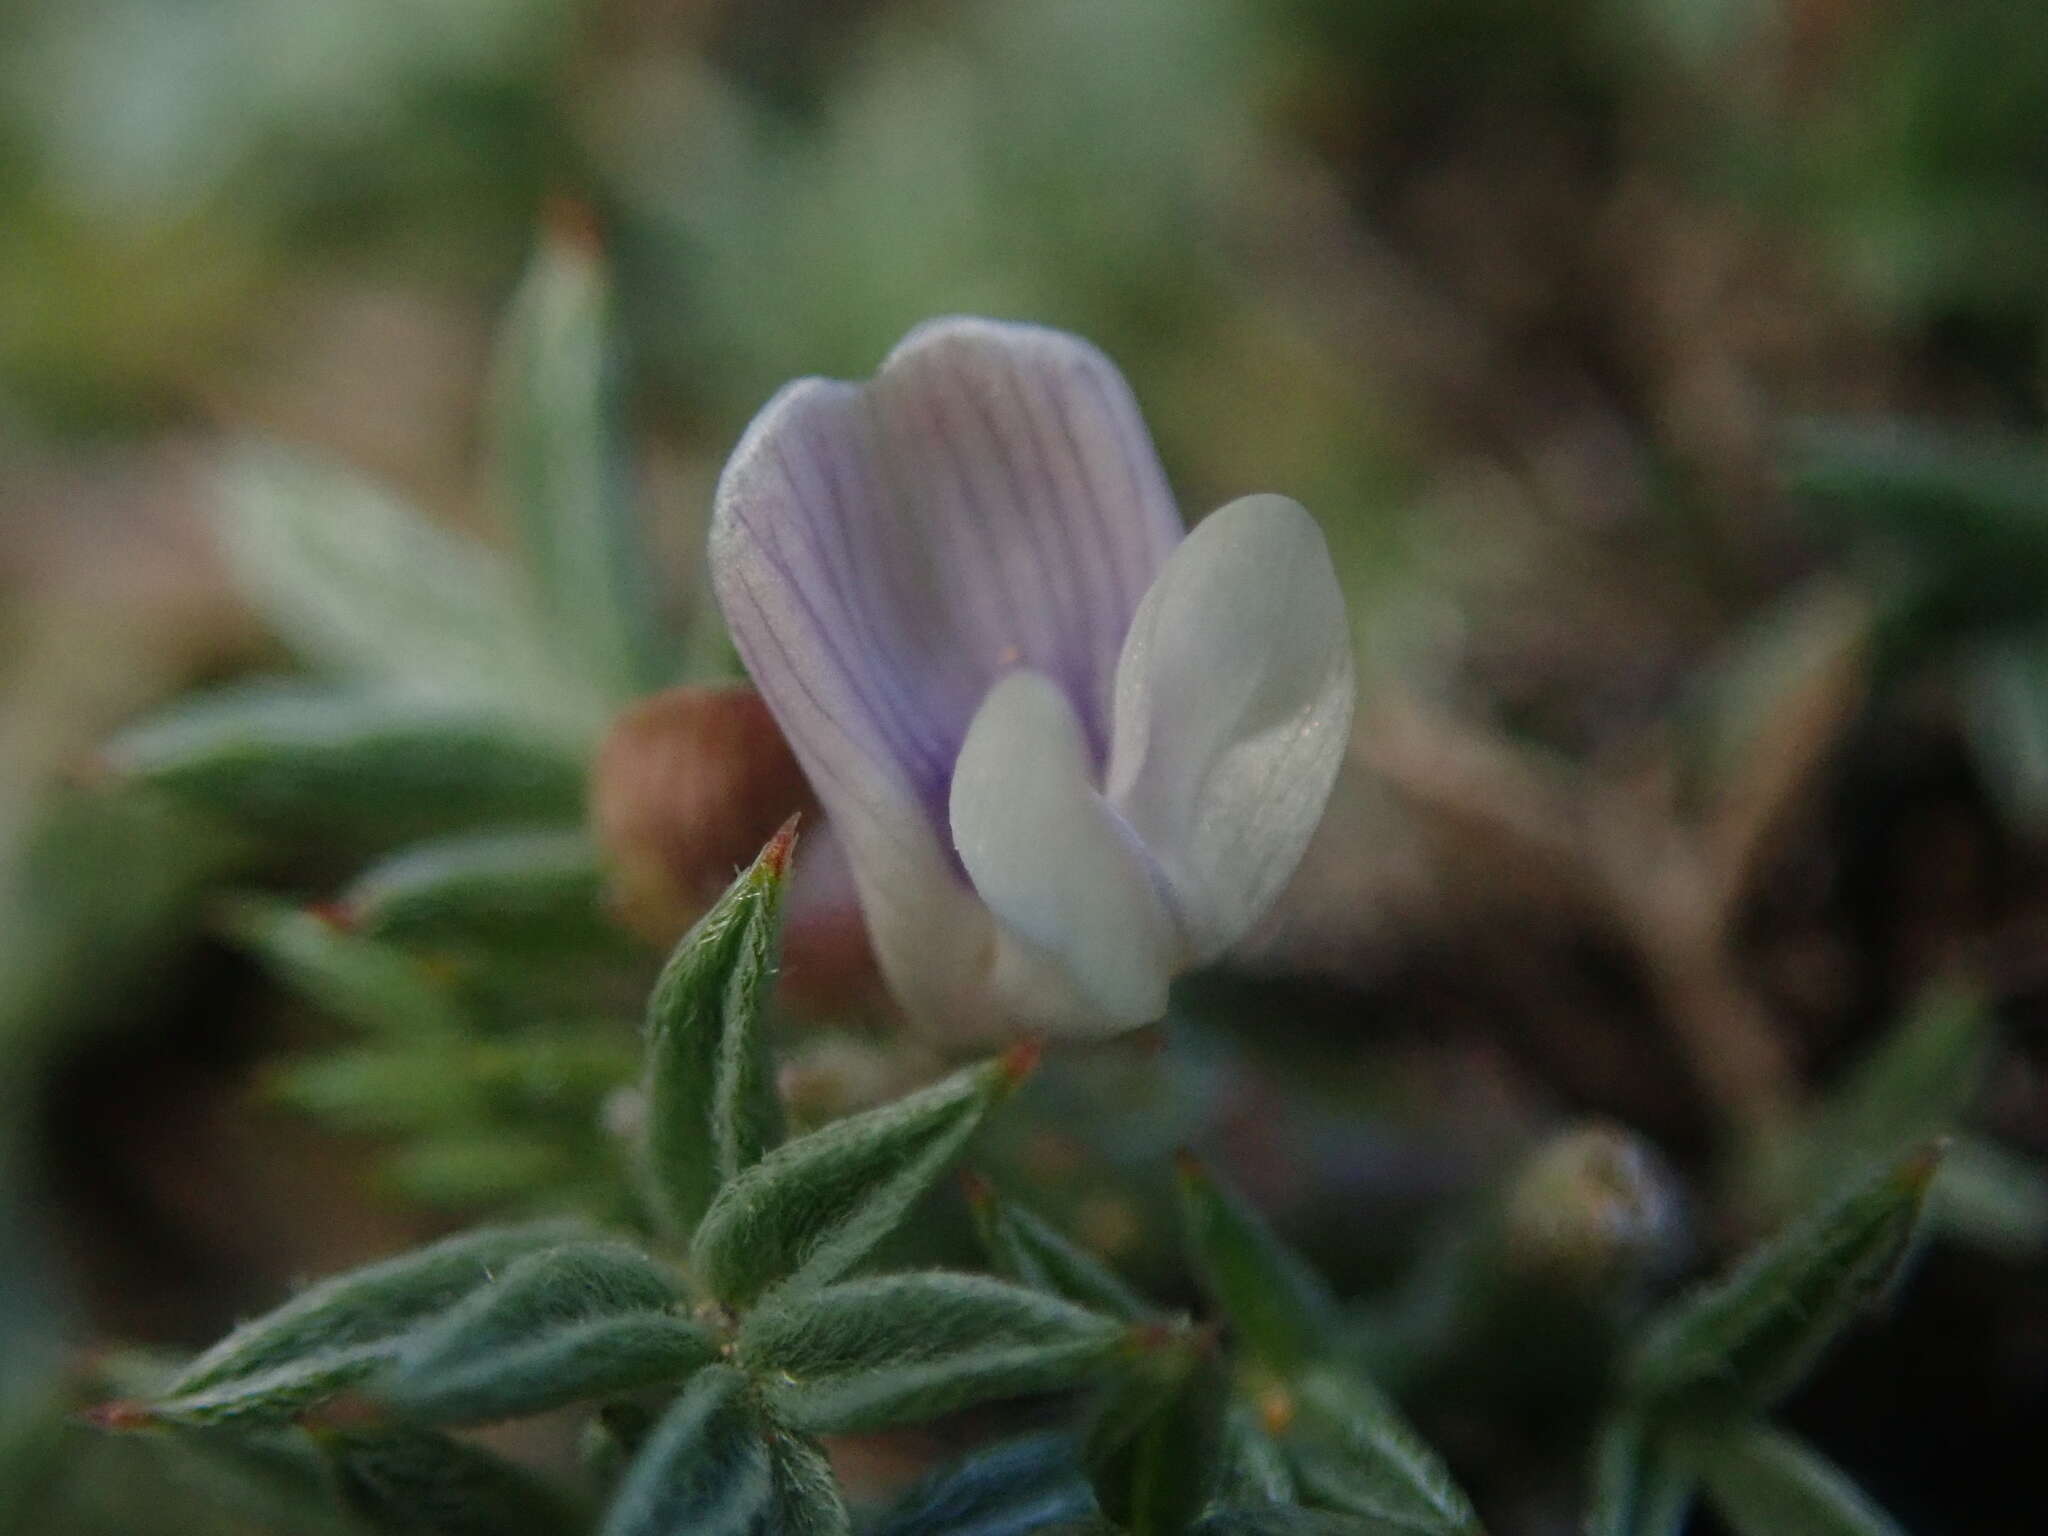 Image of spiny milkvetch